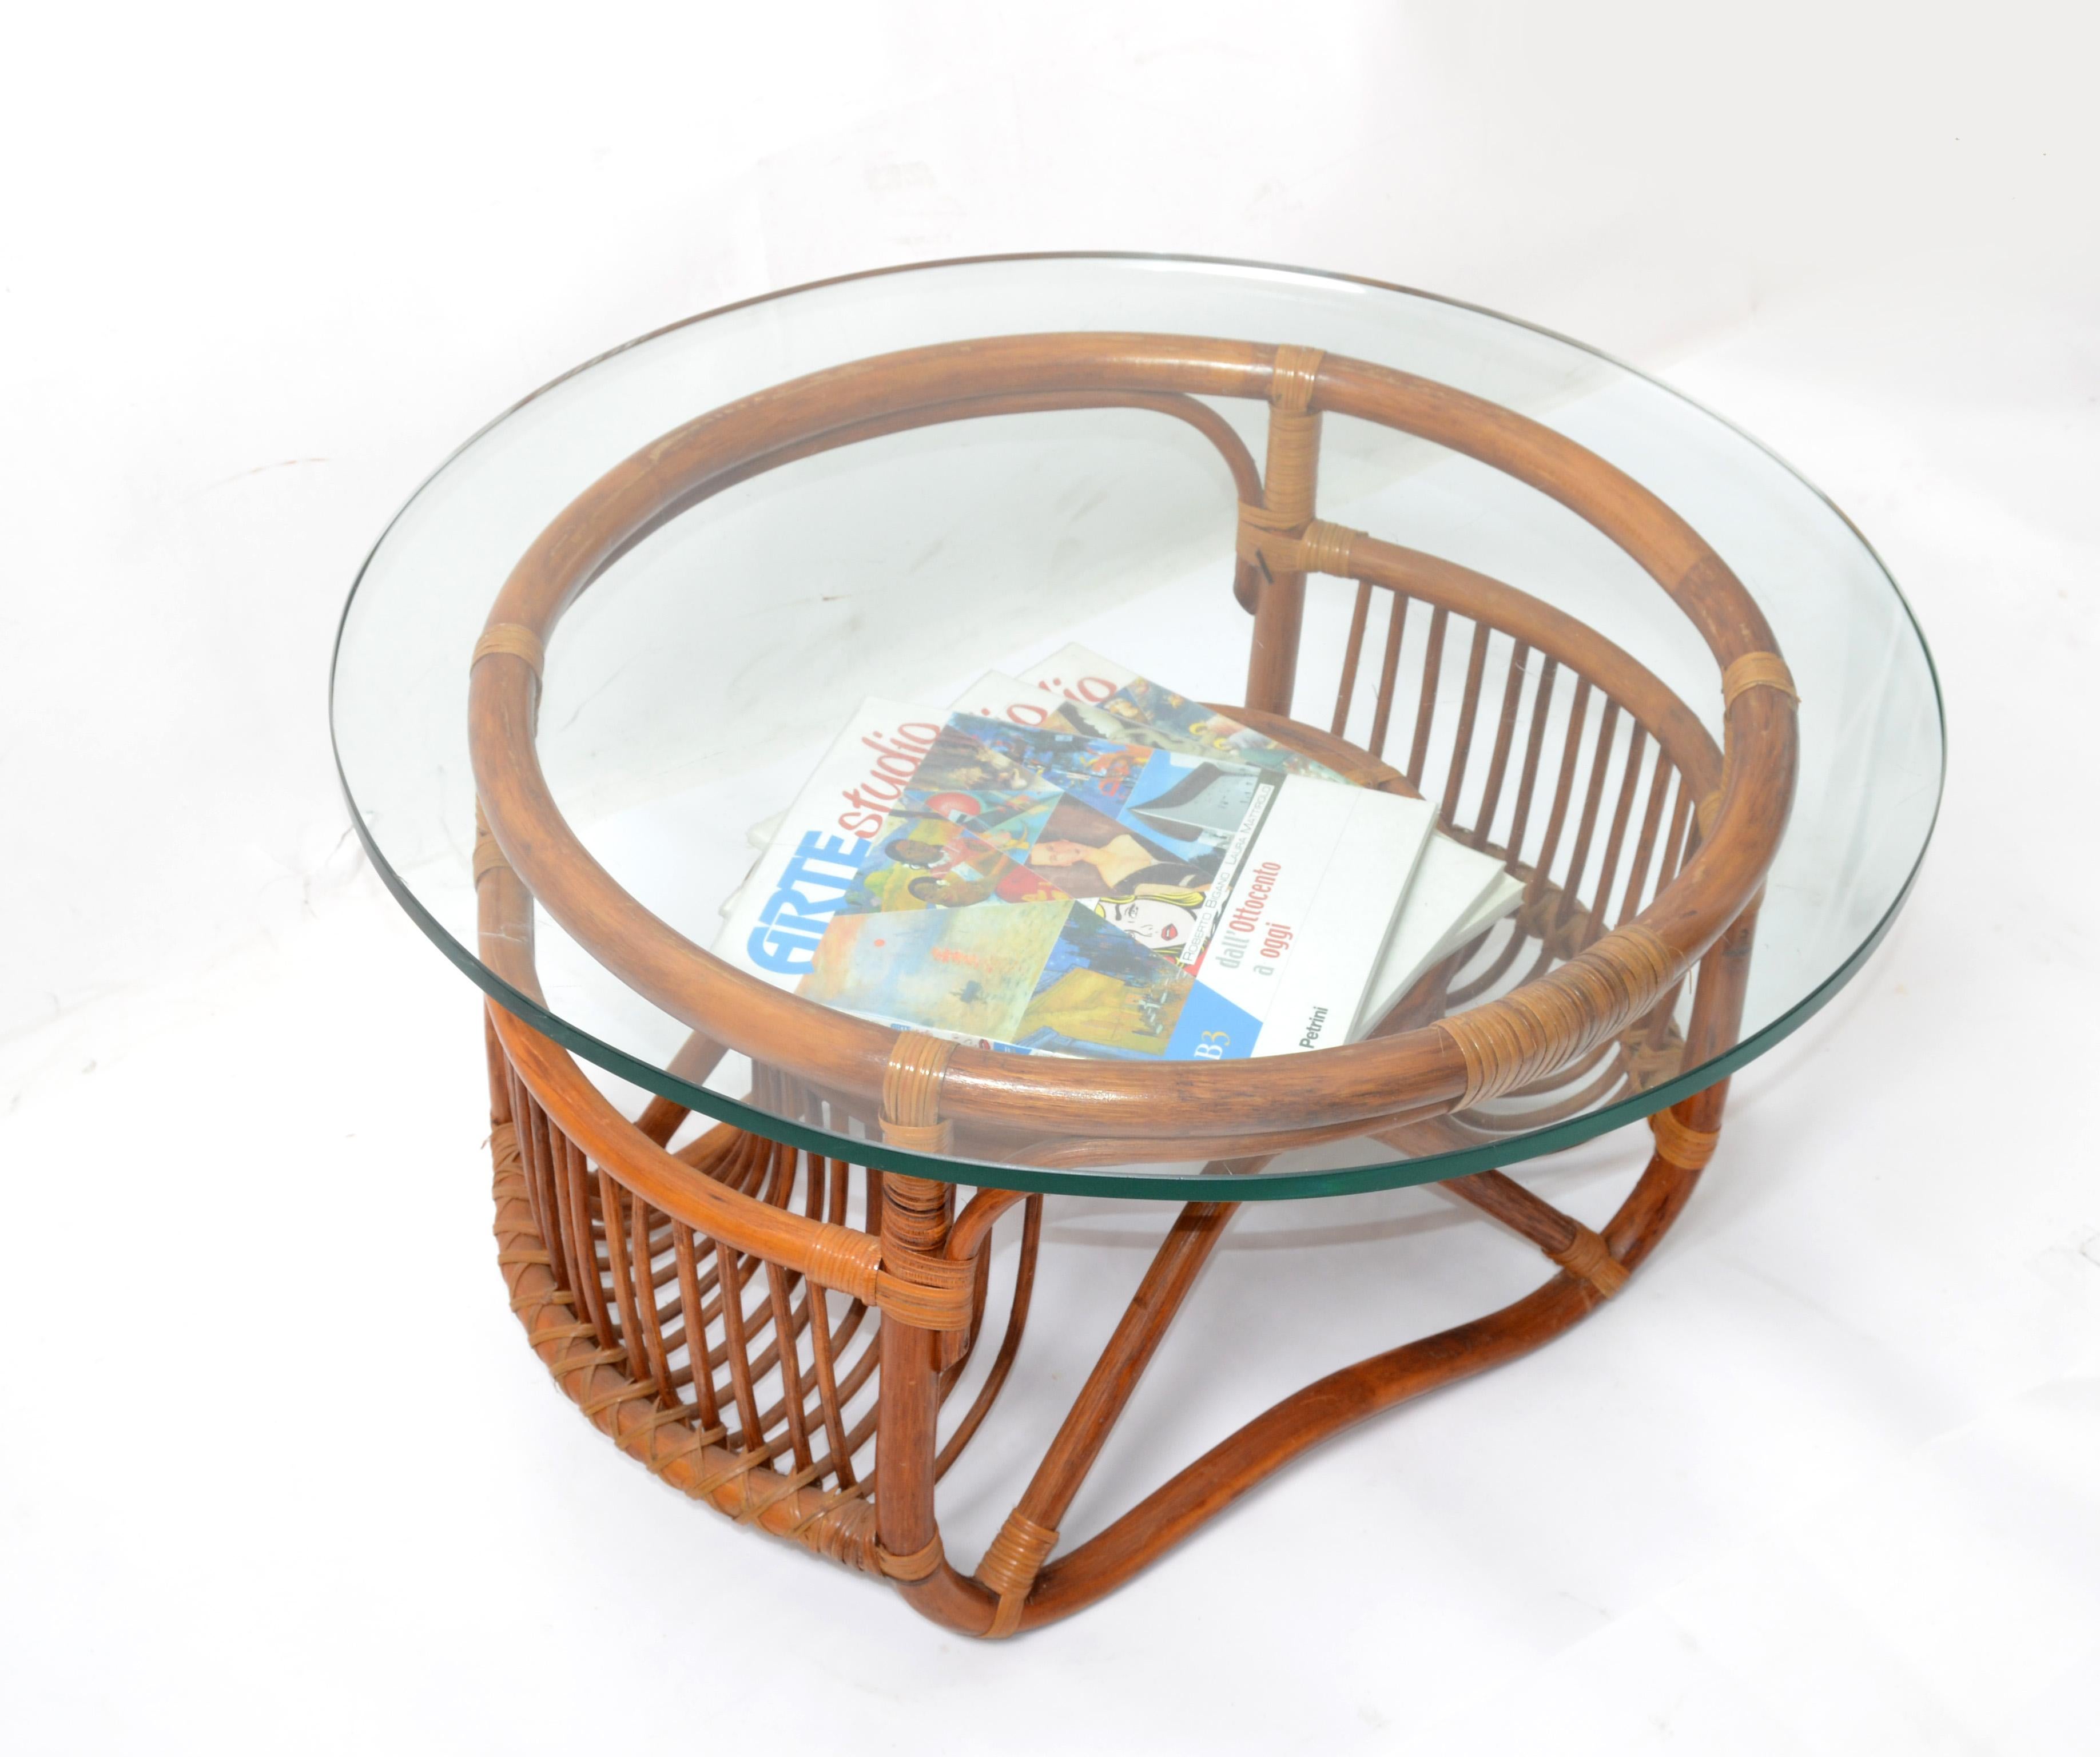 Sculptural bend bamboo wood coffee table, magazine stand handwoven with cane bindings and comes with a 0.5 inches thick round glass top.
Mid-Century Modern Boho Chic Design for a Sunroom or Your Florida Home.
In good original Condition with some